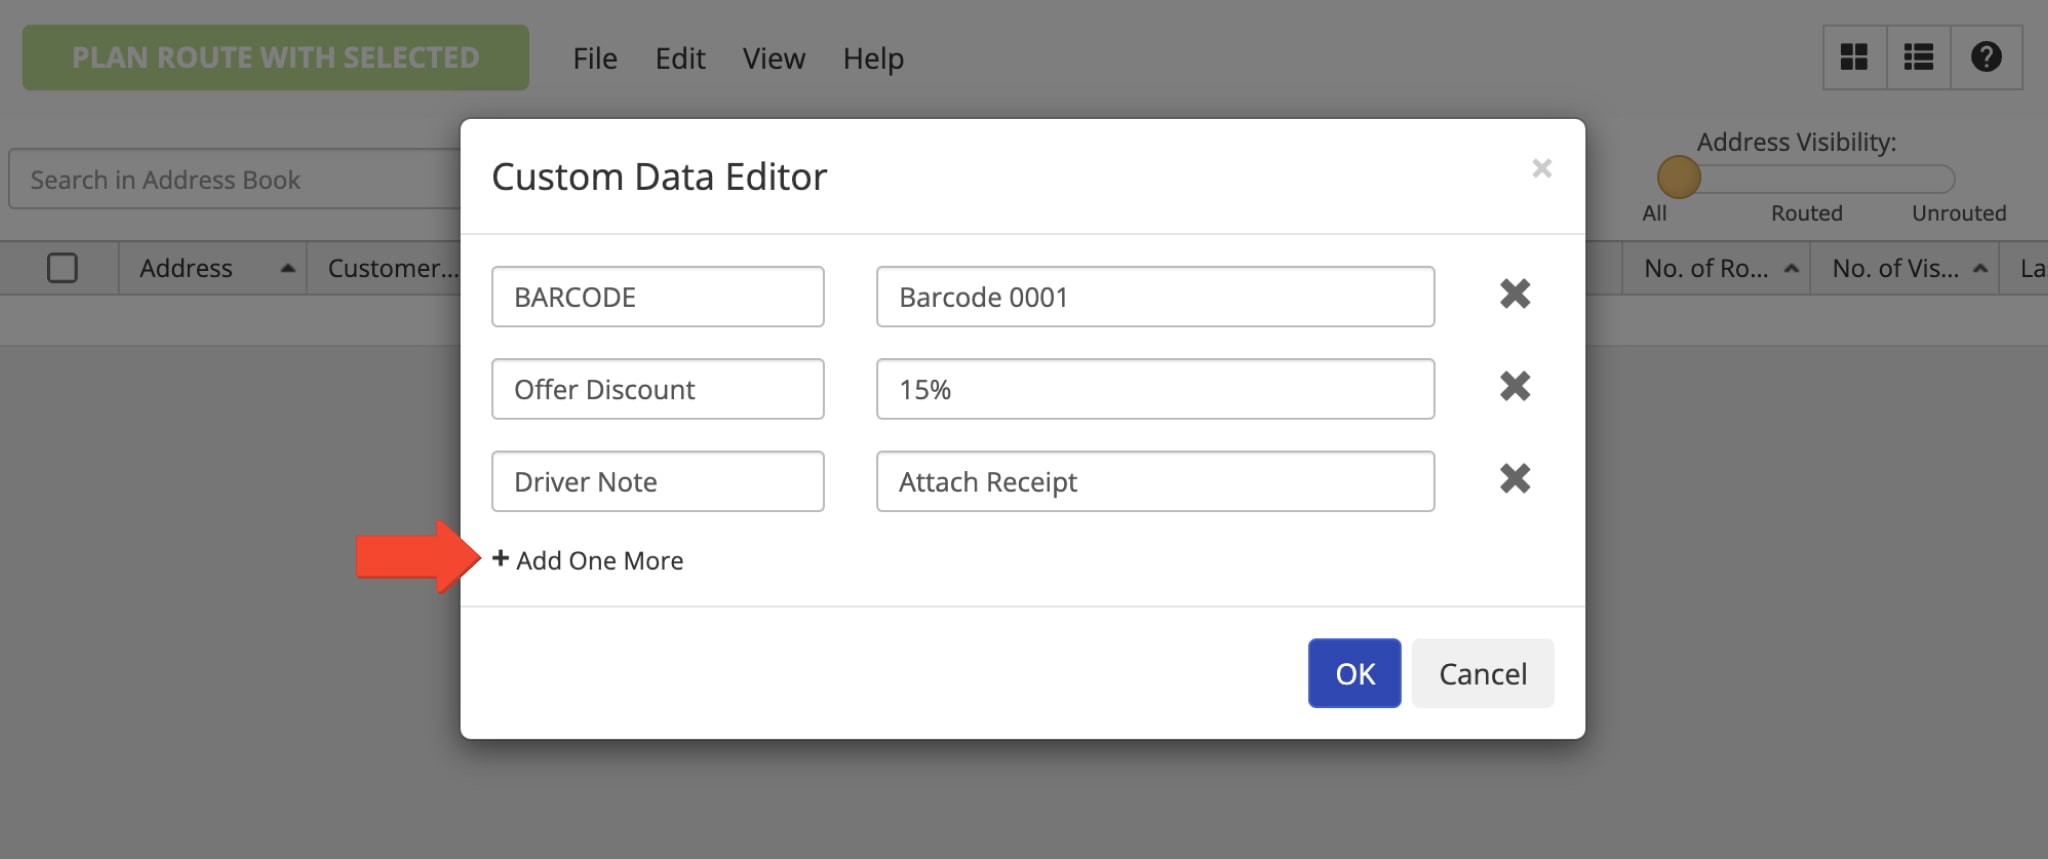 Add Custom Data to the addresses, where you can add additional address, customer, order, and any other details that don't fit into the available fields.